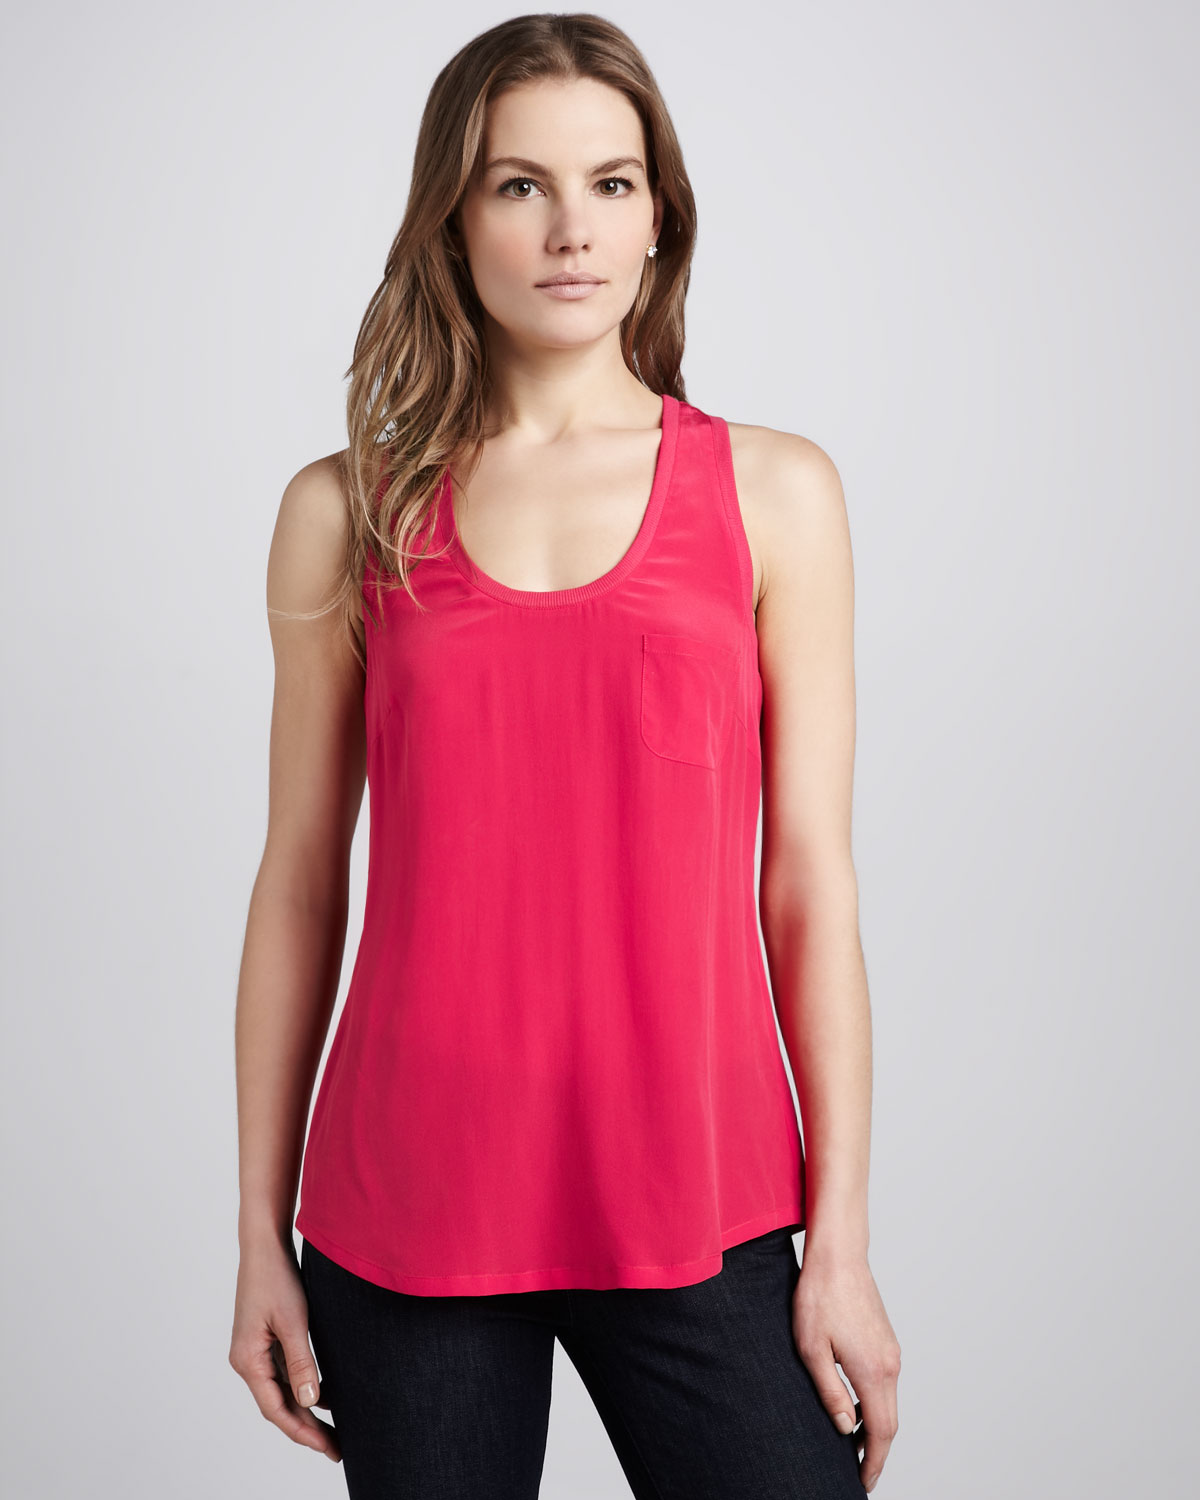 joie pink alicia sleeveless top product 1 6041844 864107499